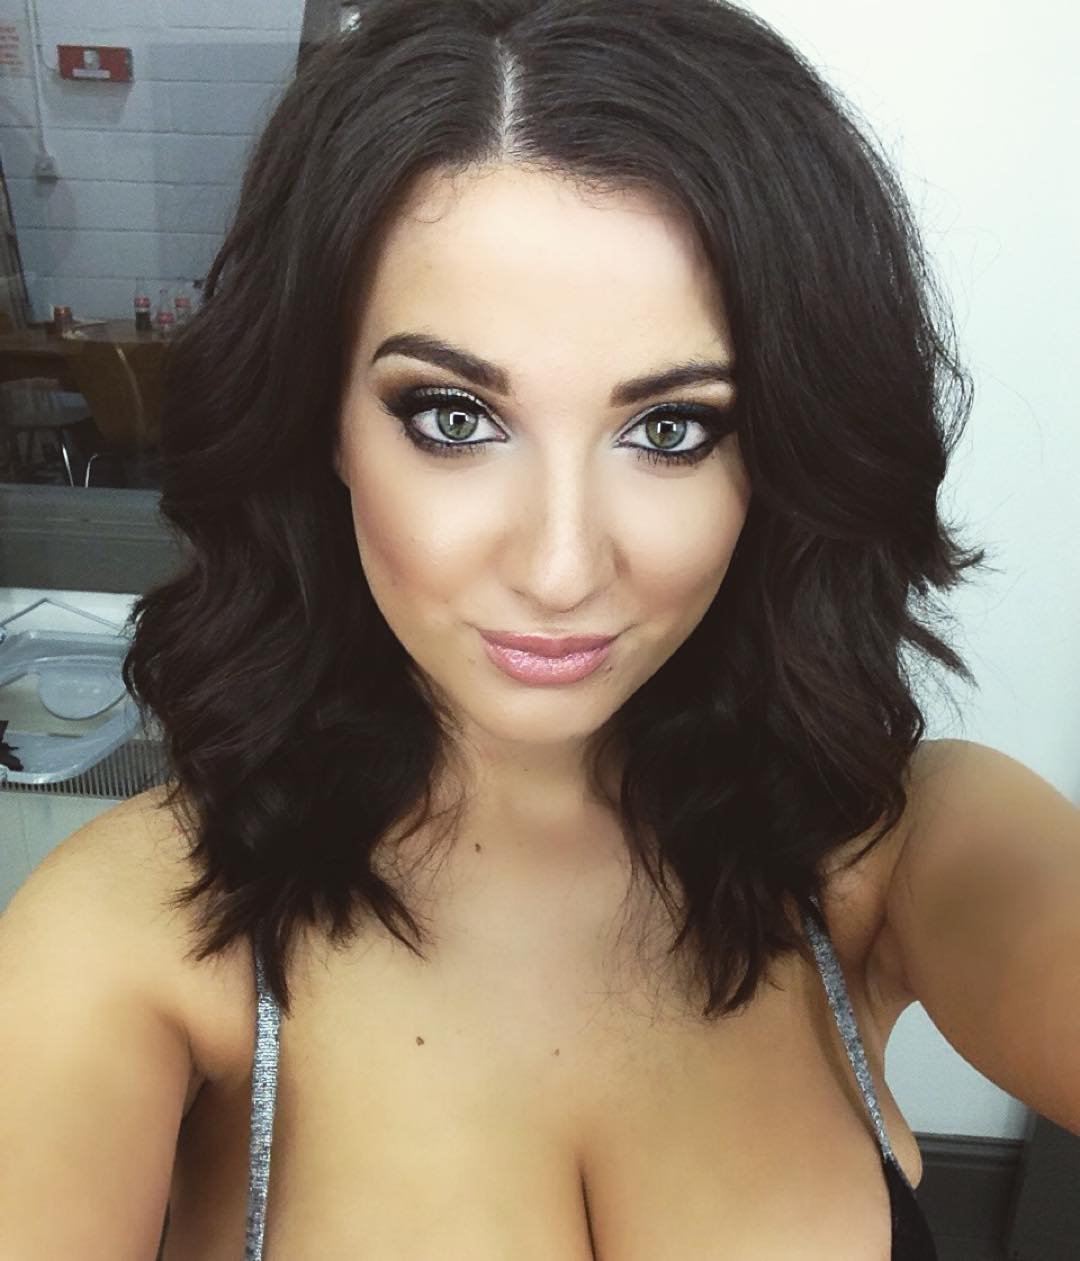 A Nice Side Boob Photo Of Joey Fisher Wearing A Tank Top Braless See More Of Joey